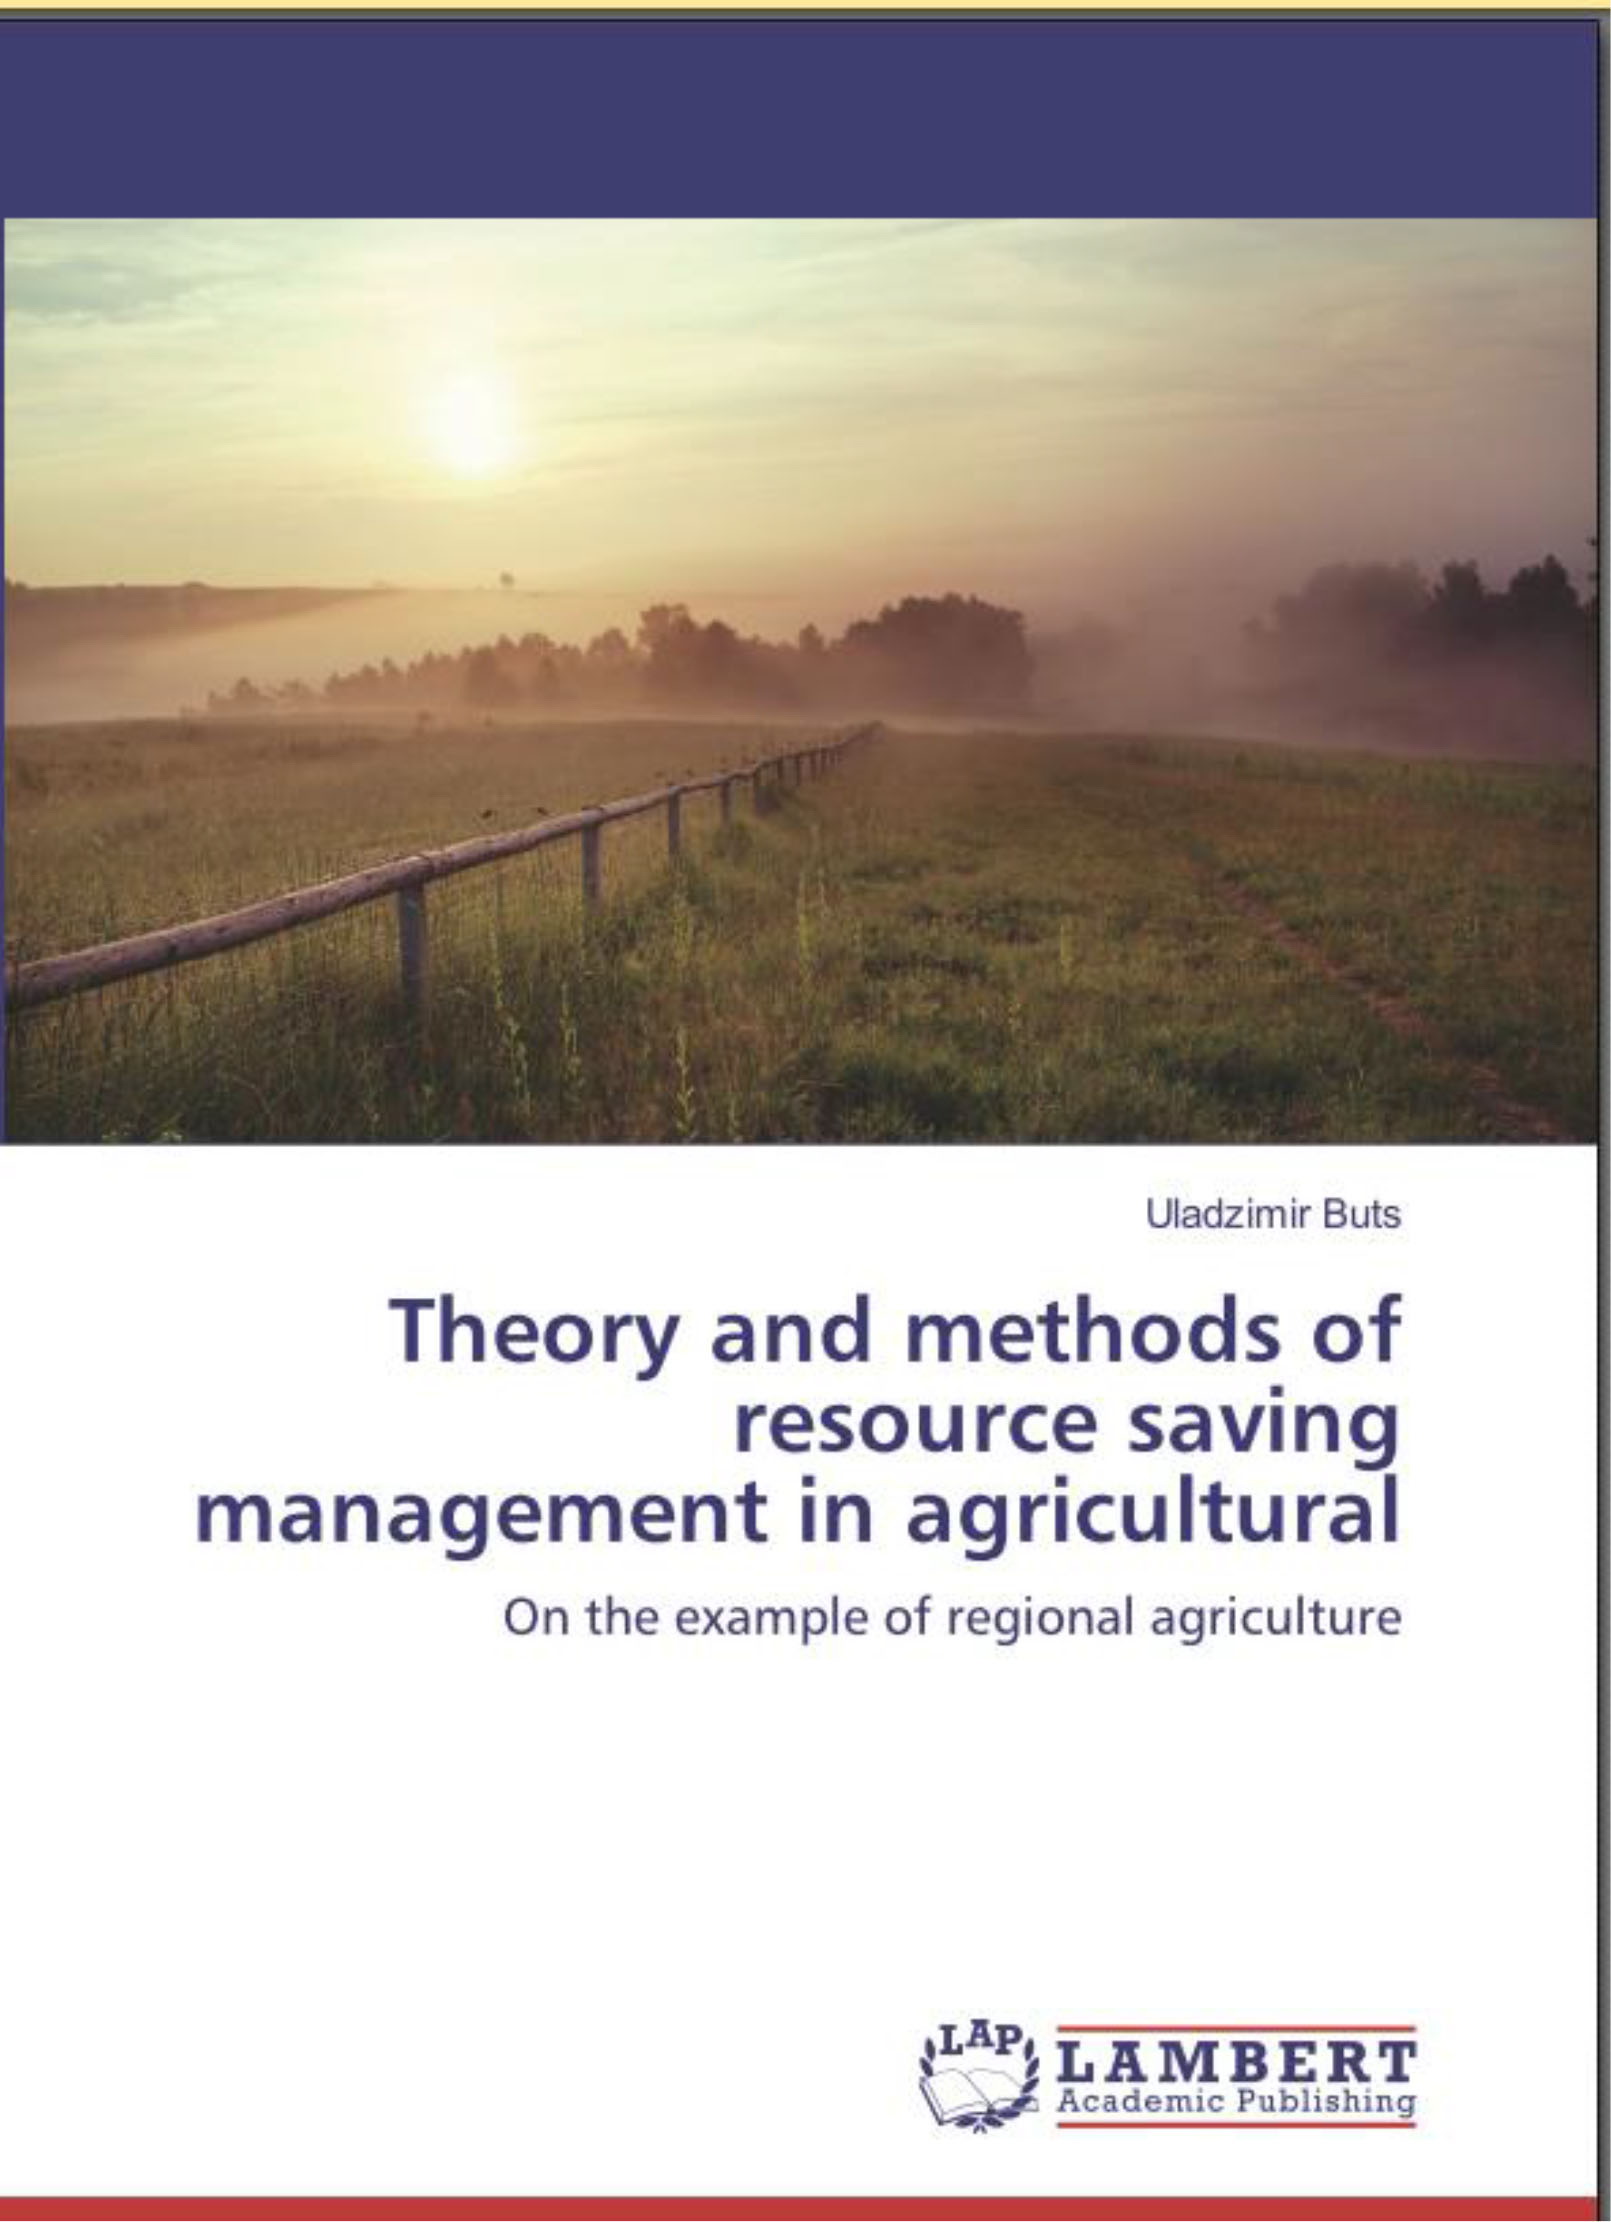 Theory and methods of resource saving management in agricultural